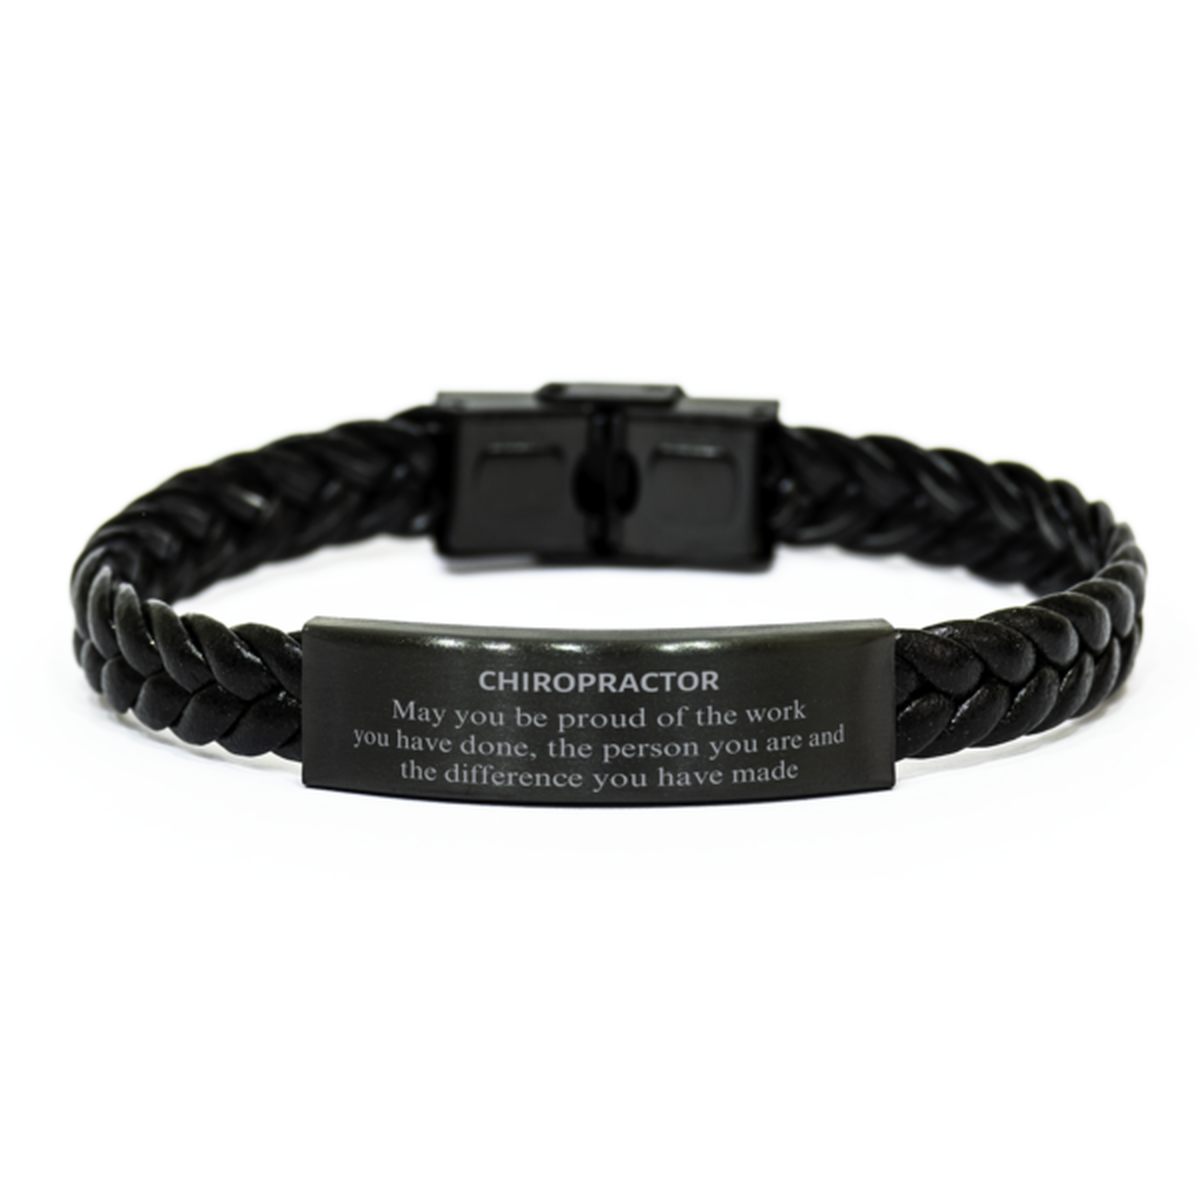 Chiropractor May you be proud of the work you have done, Retirement Chiropractor Braided Leather Bracelet for Colleague Appreciation Gifts Amazing for Chiropractor